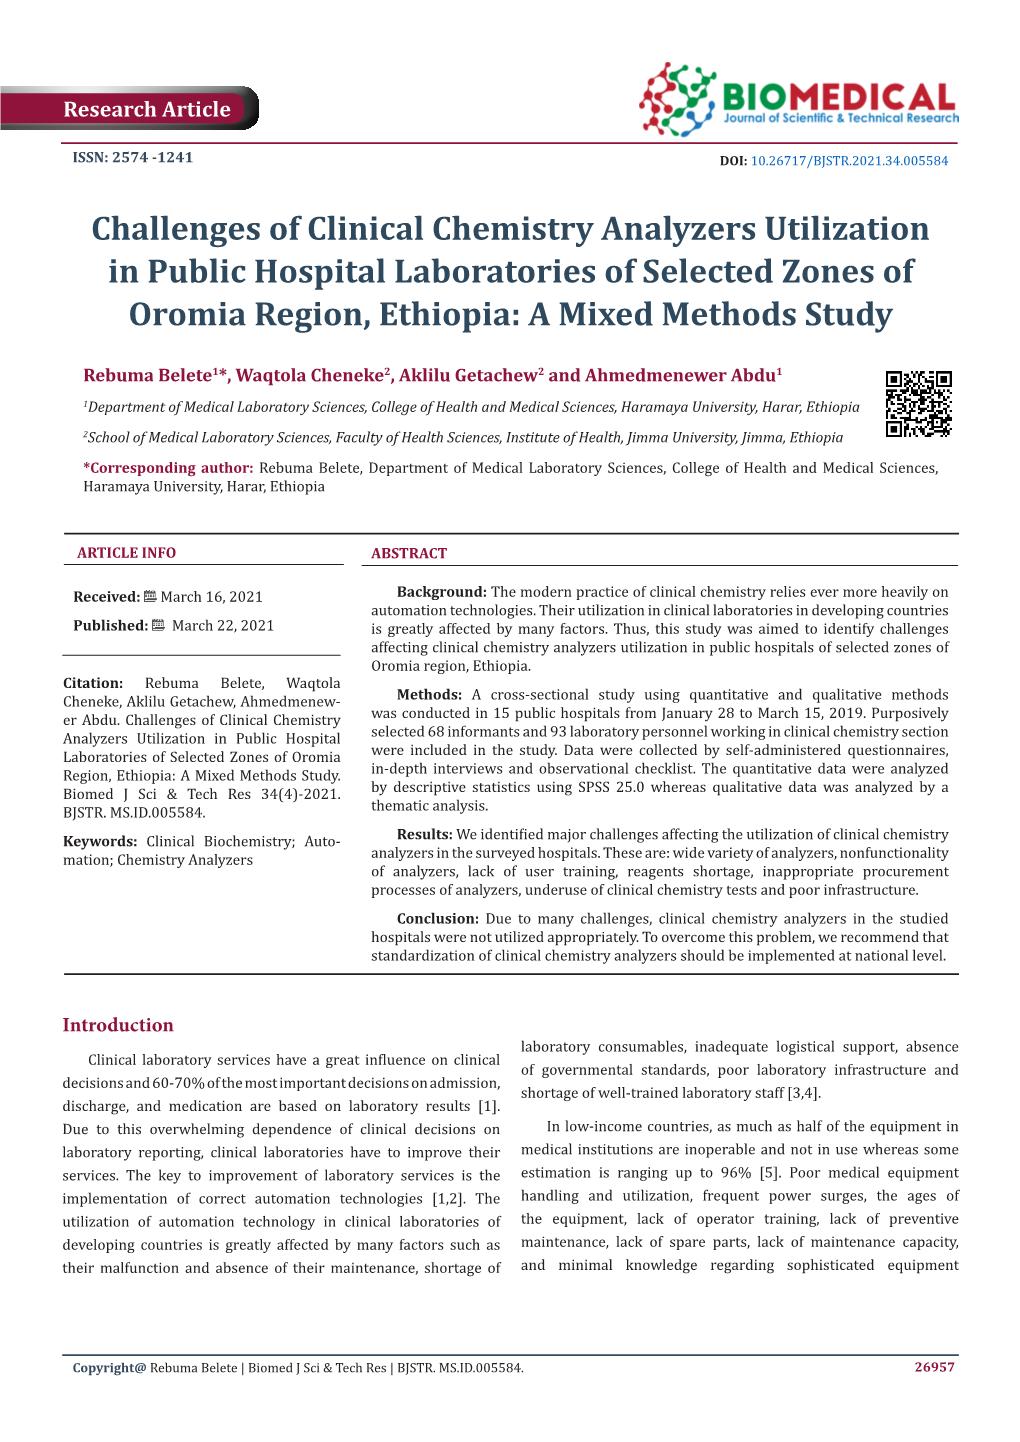 Challenges of Clinical Chemistry Analyzers Utilization in Public Hospital Laboratories of Selected Zones of Oromia Region, Ethiopia: a Mixed Methods Study